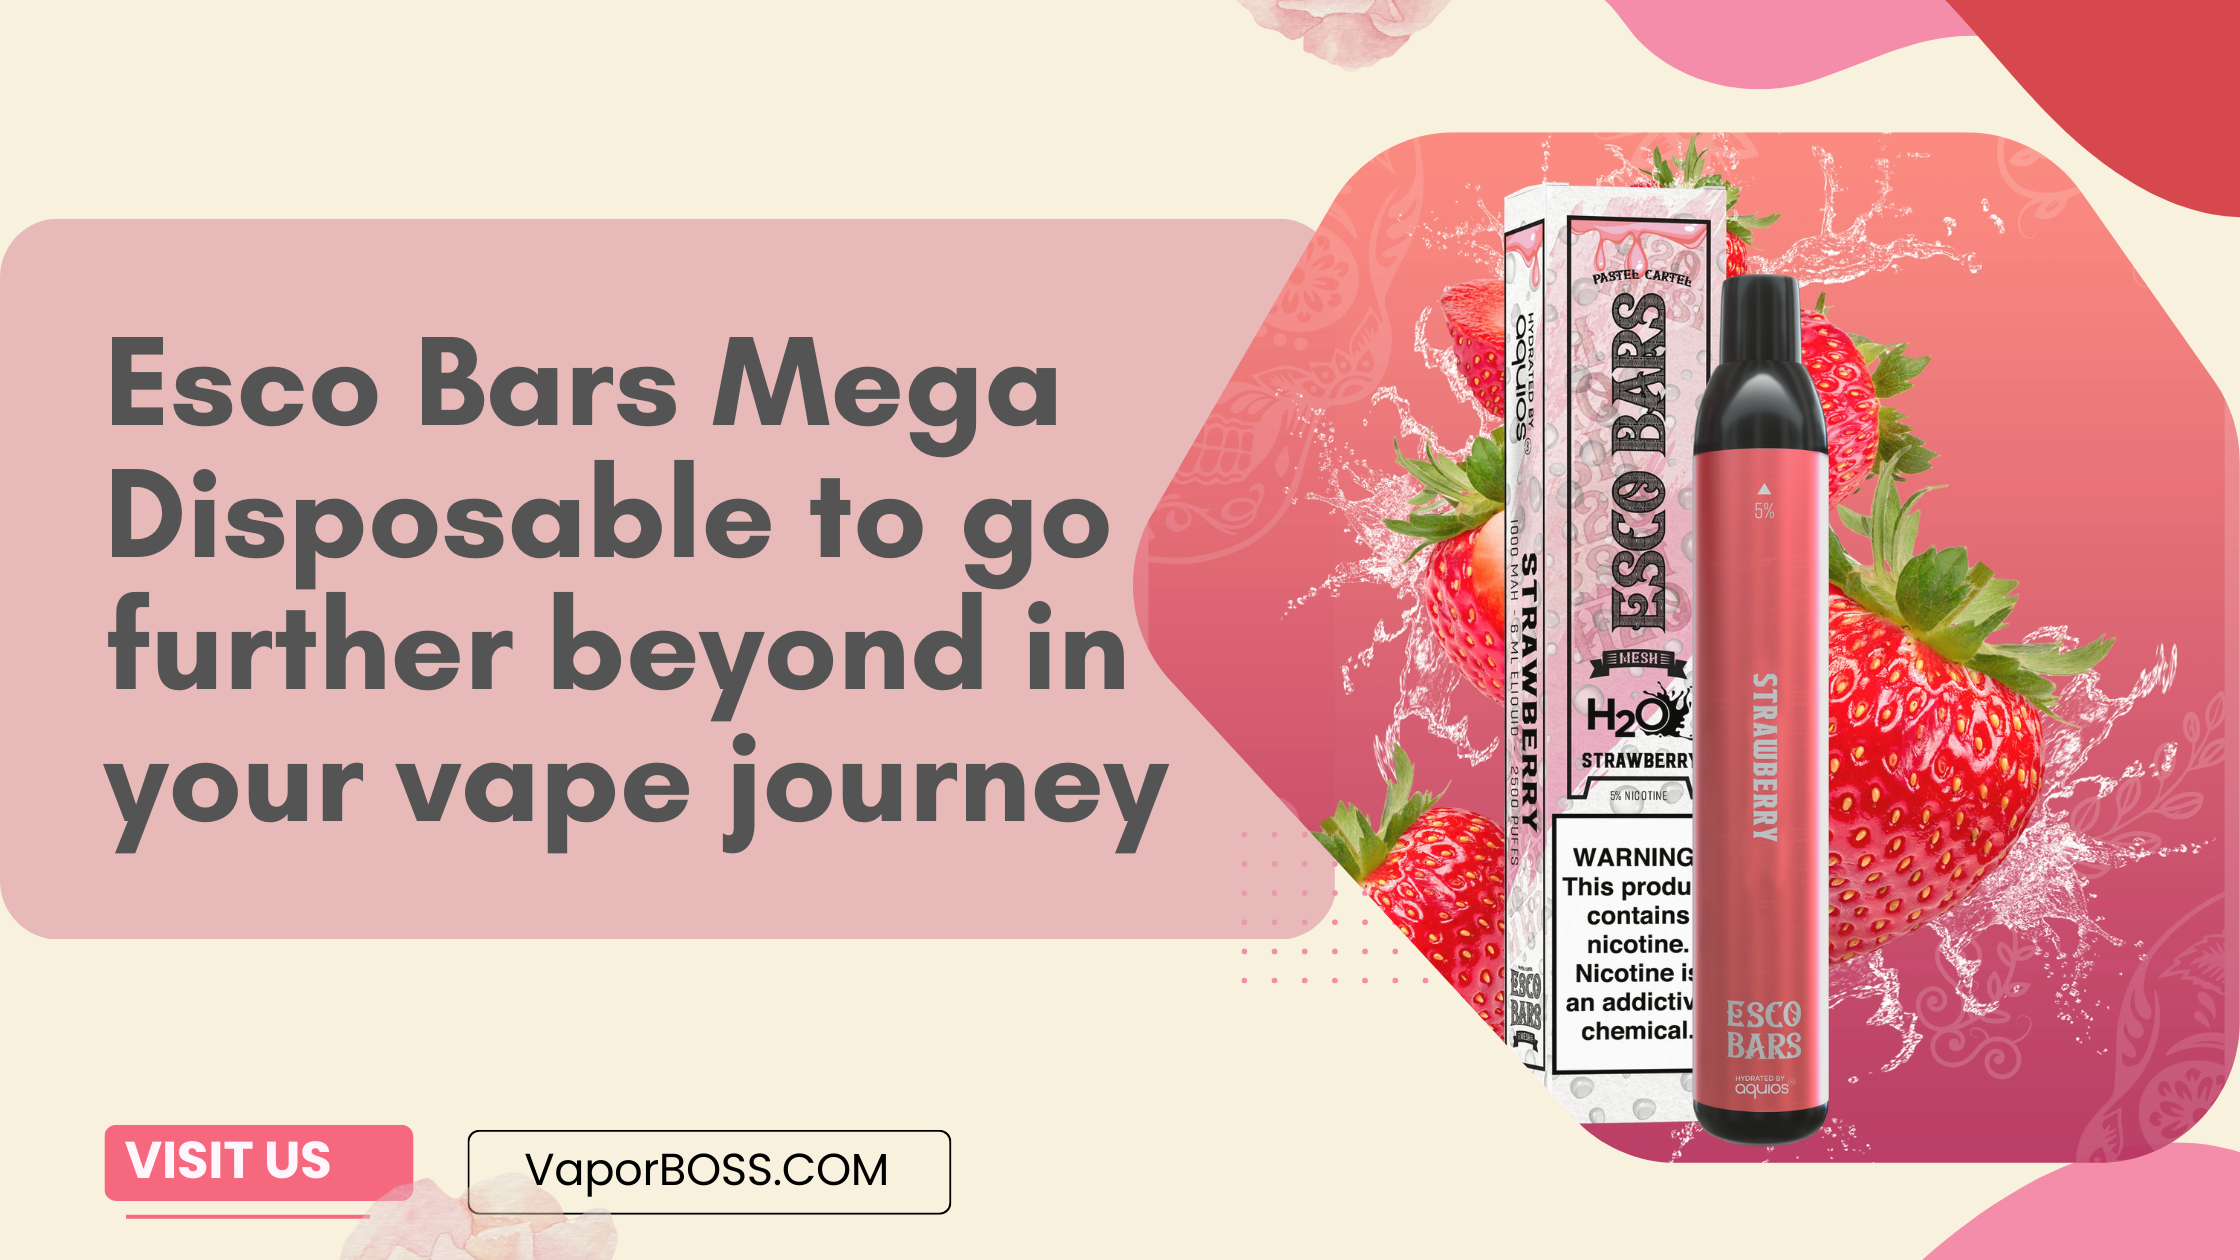 Esco Bars Mega Disposable to go further and beyond in your vape journey